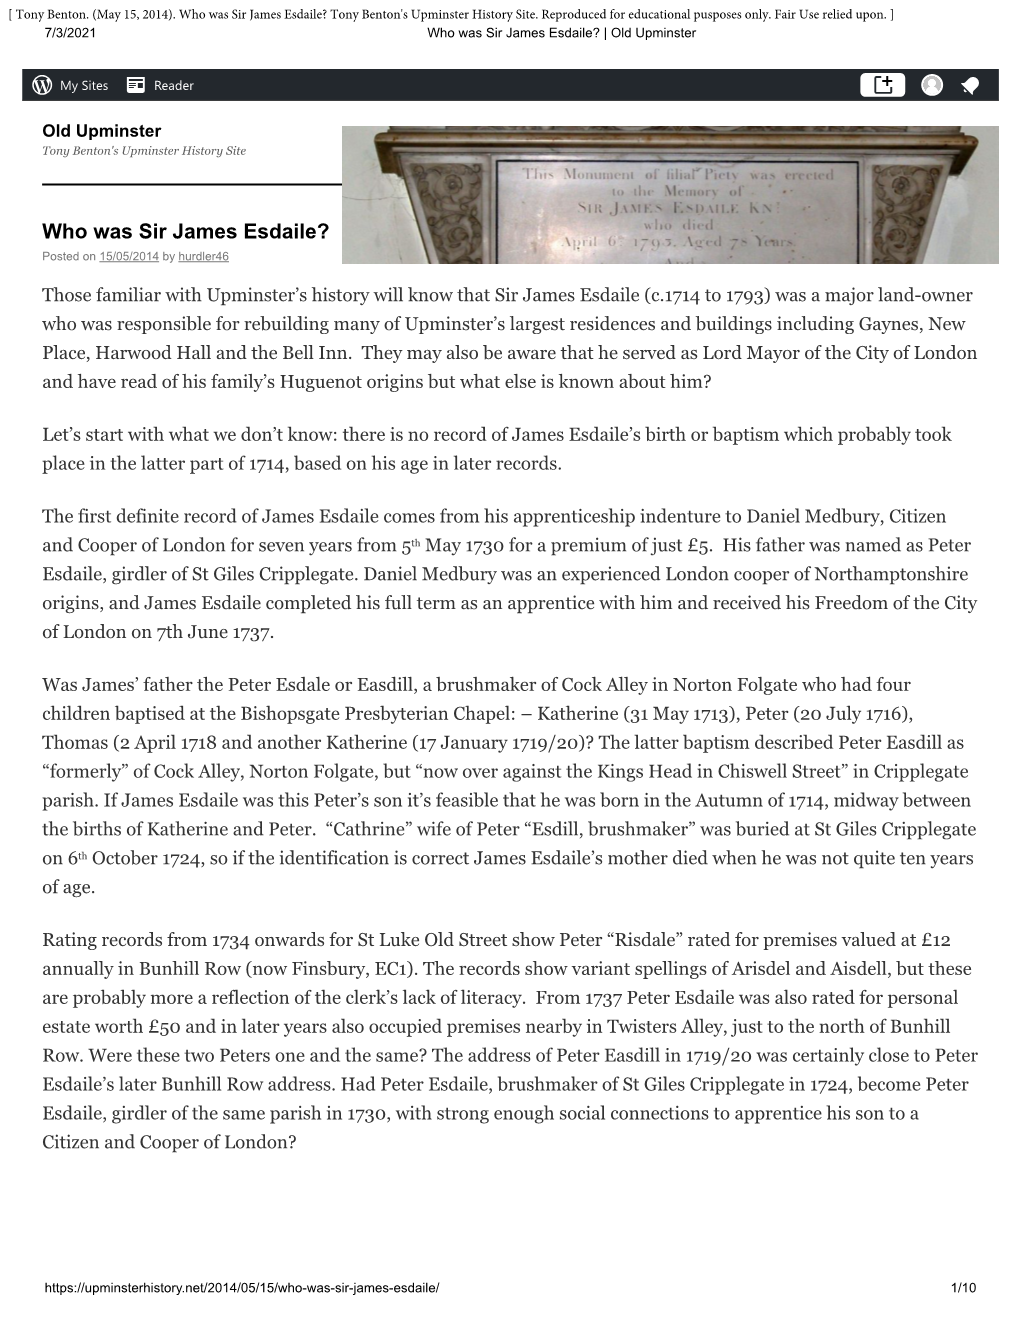 Who Was Sir James Esdaile? Tony Benton's Upminster History Site